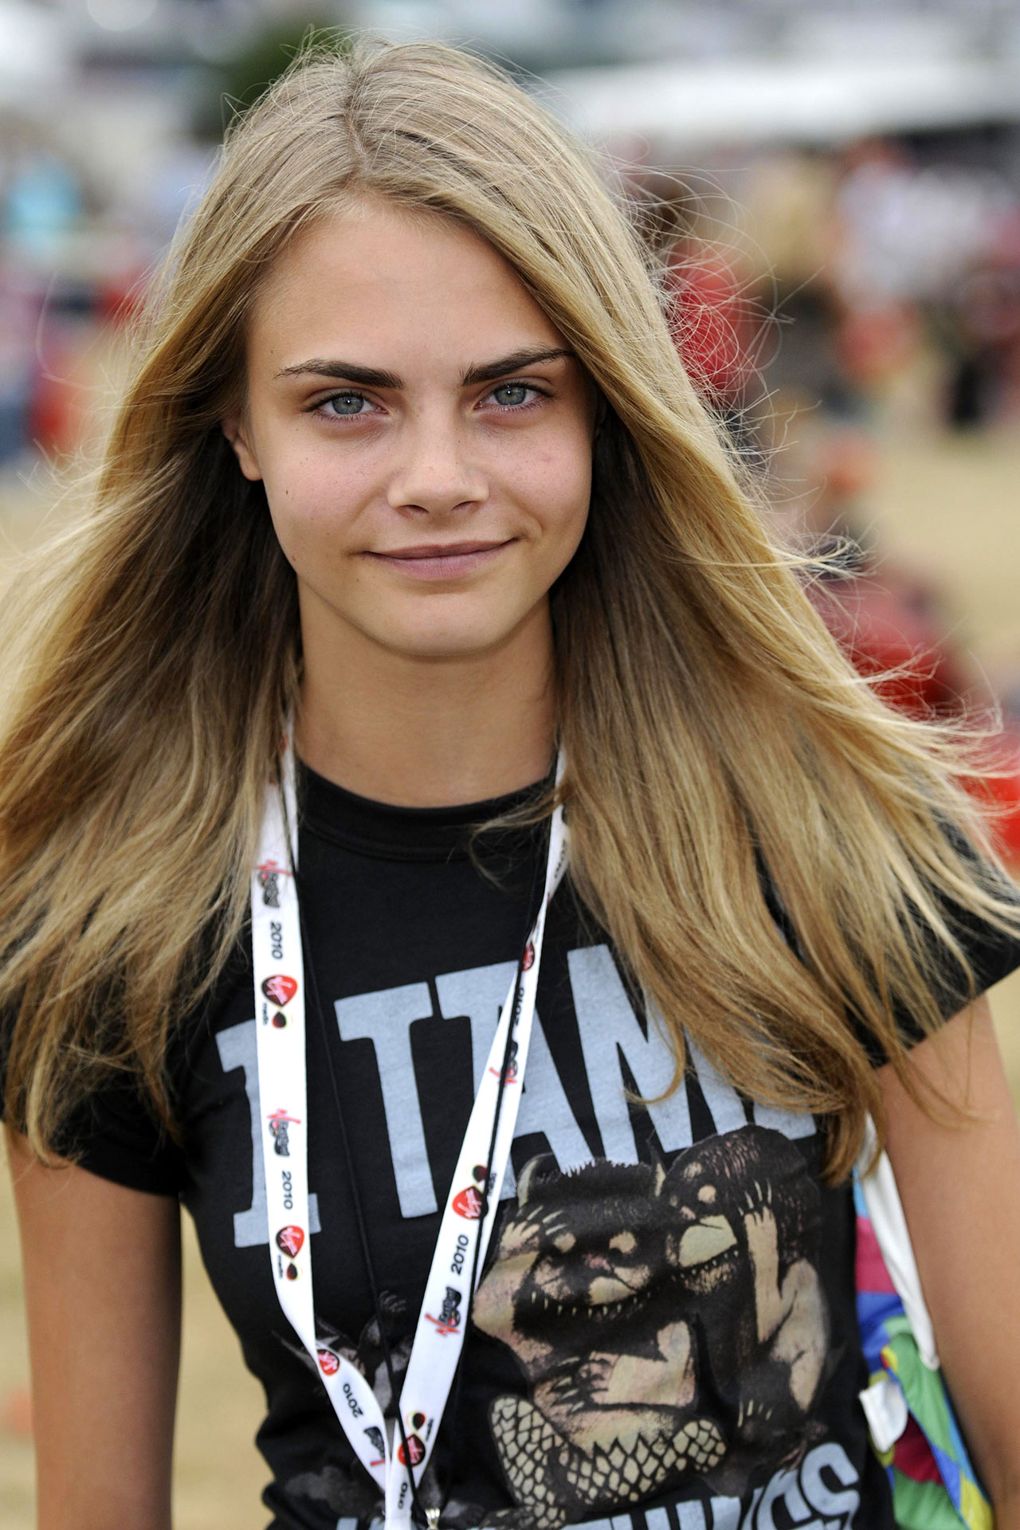 Cara Delevingne Hair Style Collection - NiceStyles